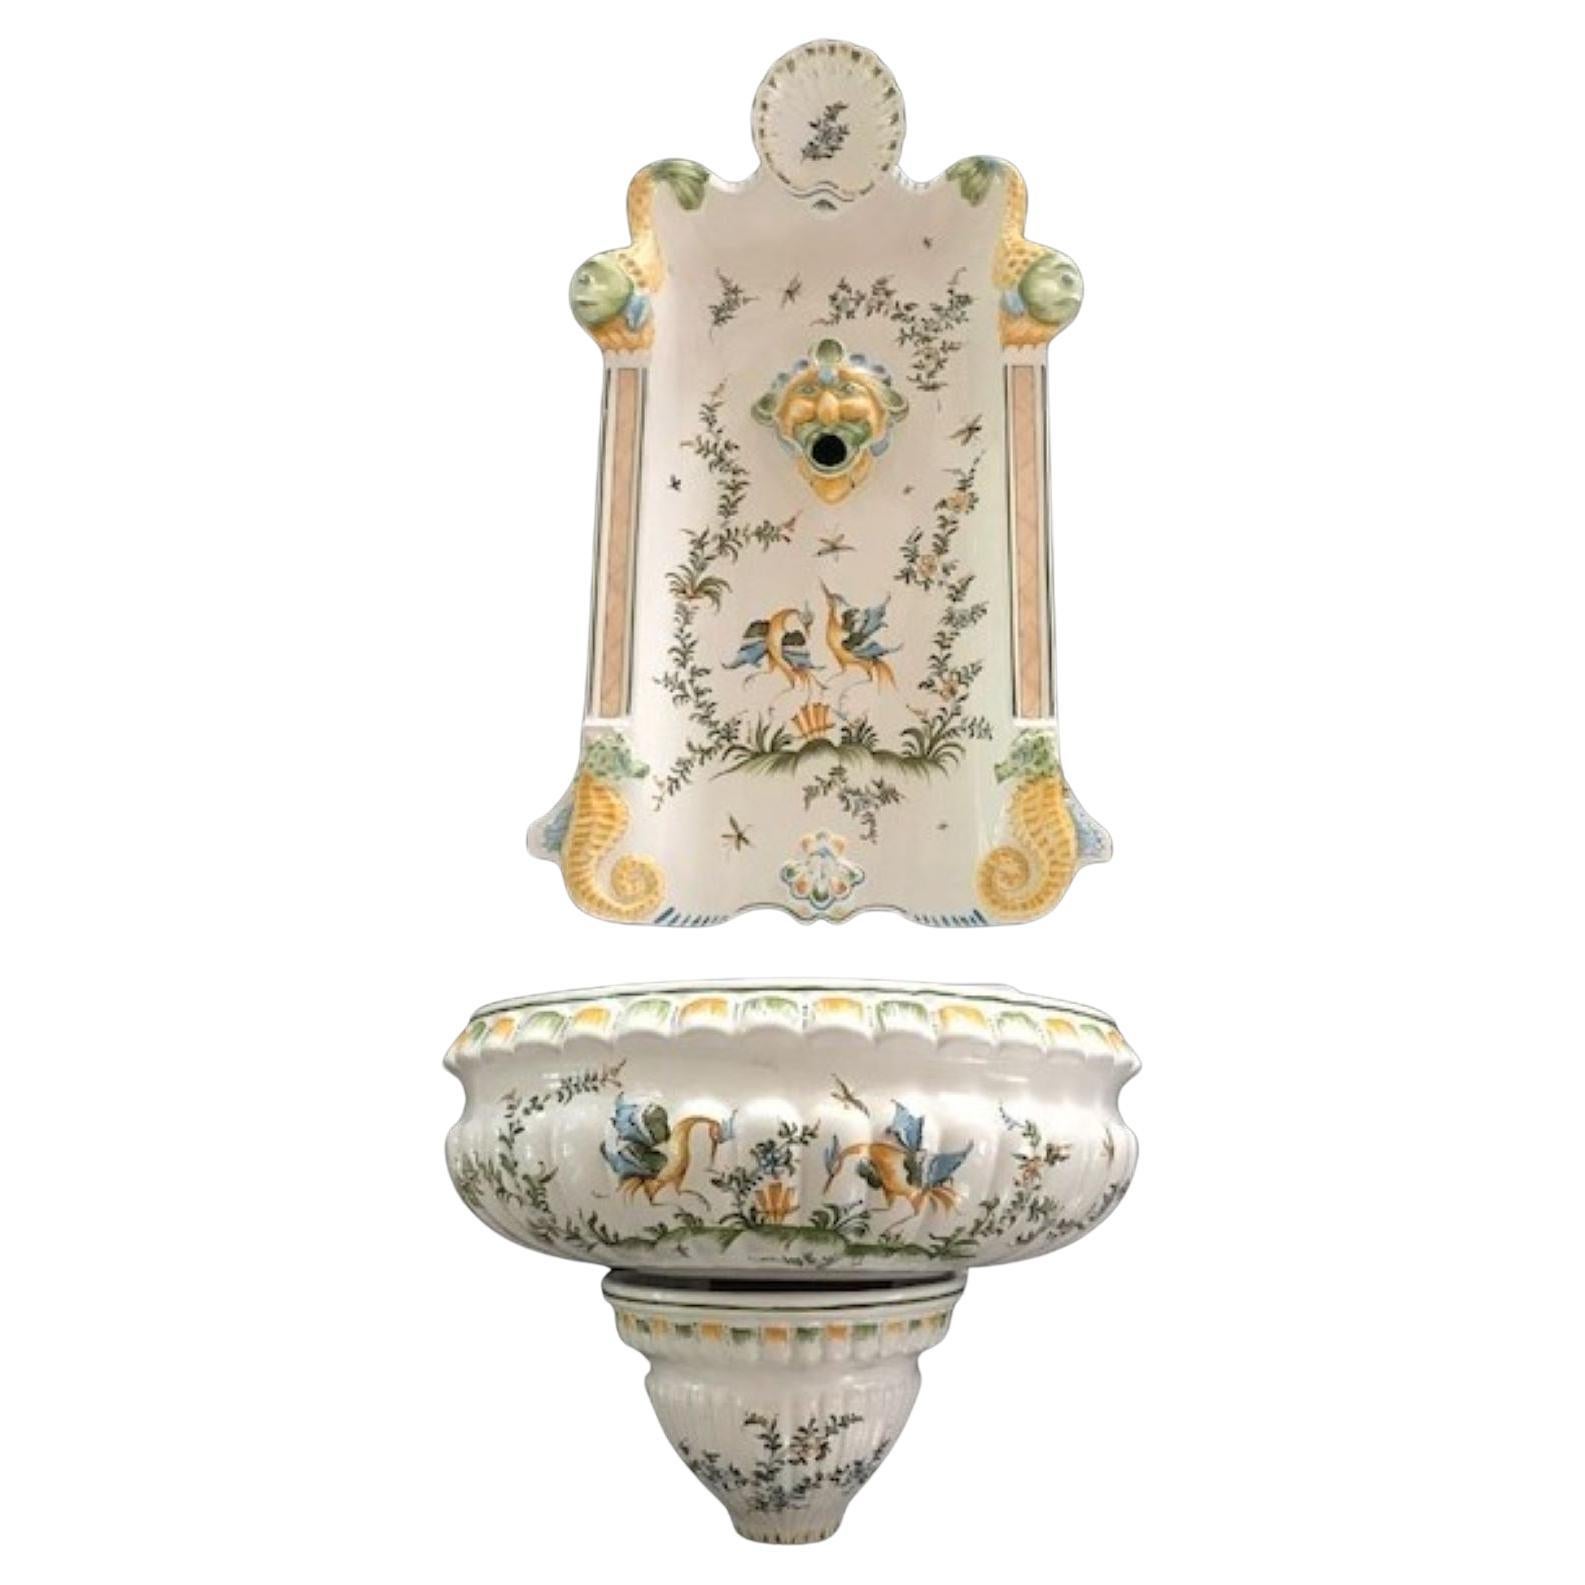 Large Moustiers French faiance wall lavabo hand painted and signed.

Measures: Backsplash is approximately 23 in. L. x 14 in. W.
Basin is approximately 7 in. H. x 15 in. W. x 11 in. D


This piece came from the Estate of Linda McRae Noe Laine.